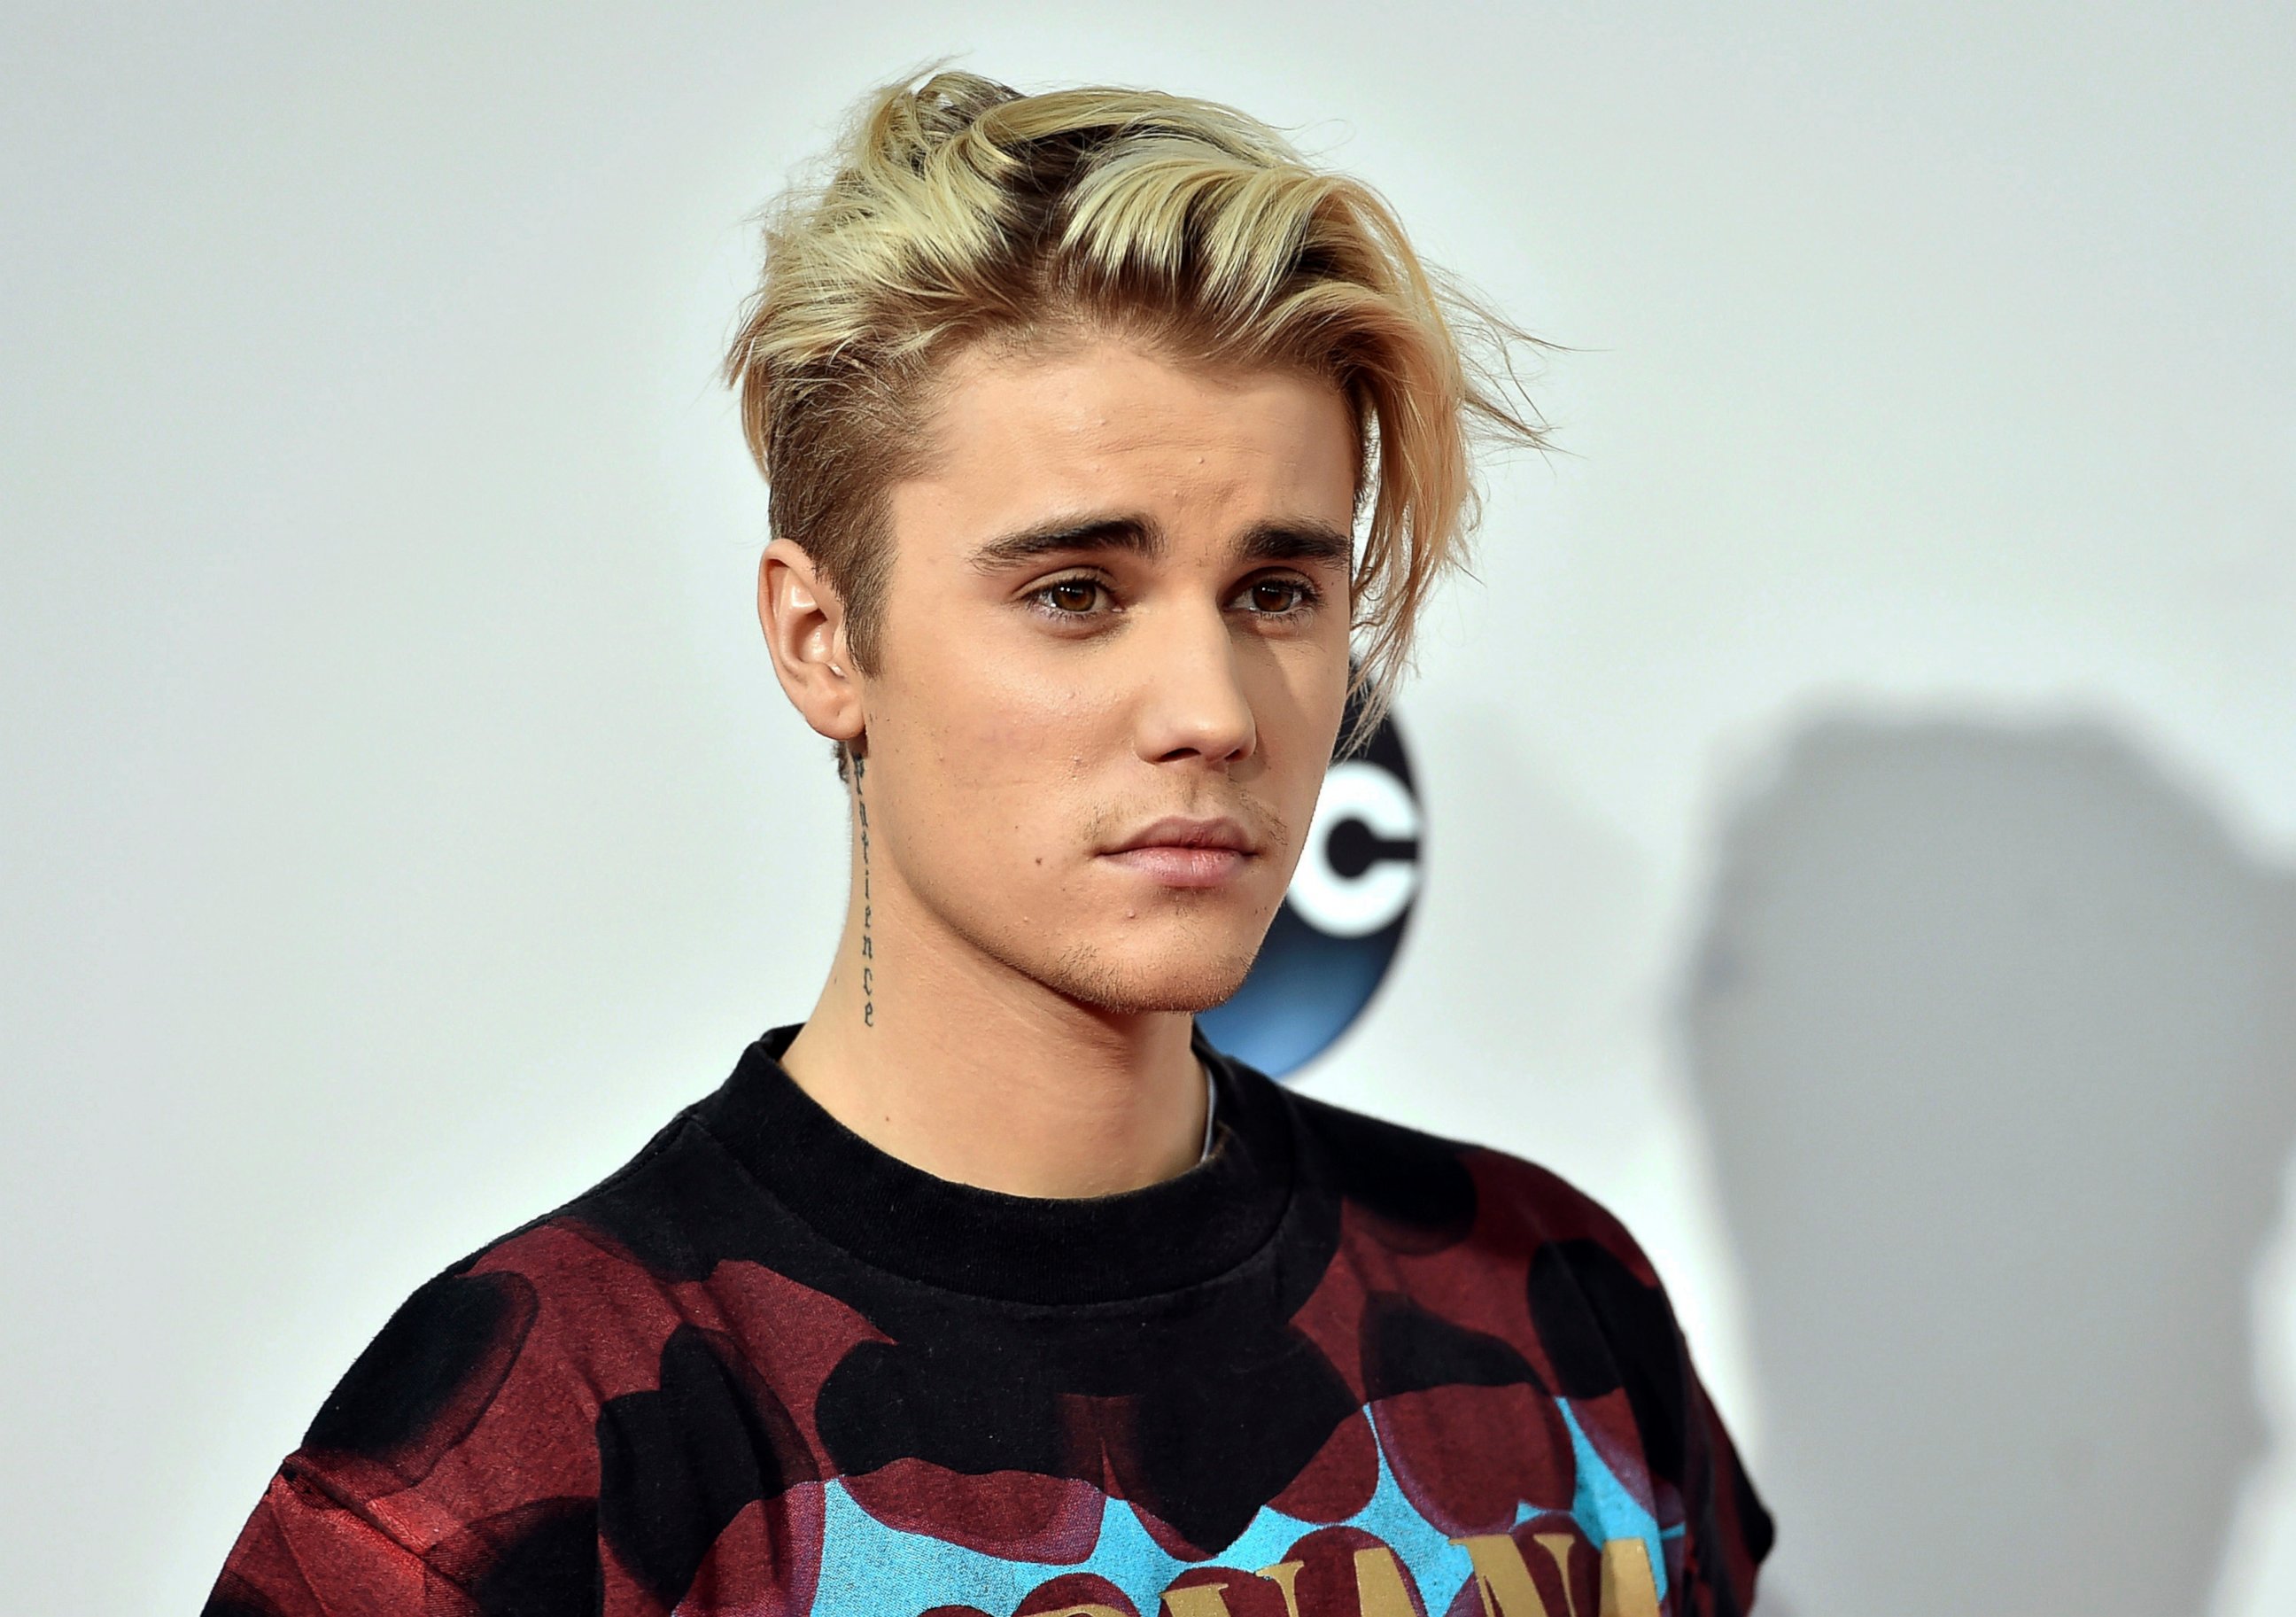 PHOTO: This Nov. 22, 2015 file photo shows Justin Bieber at the American Music Awards in Los Angeles.